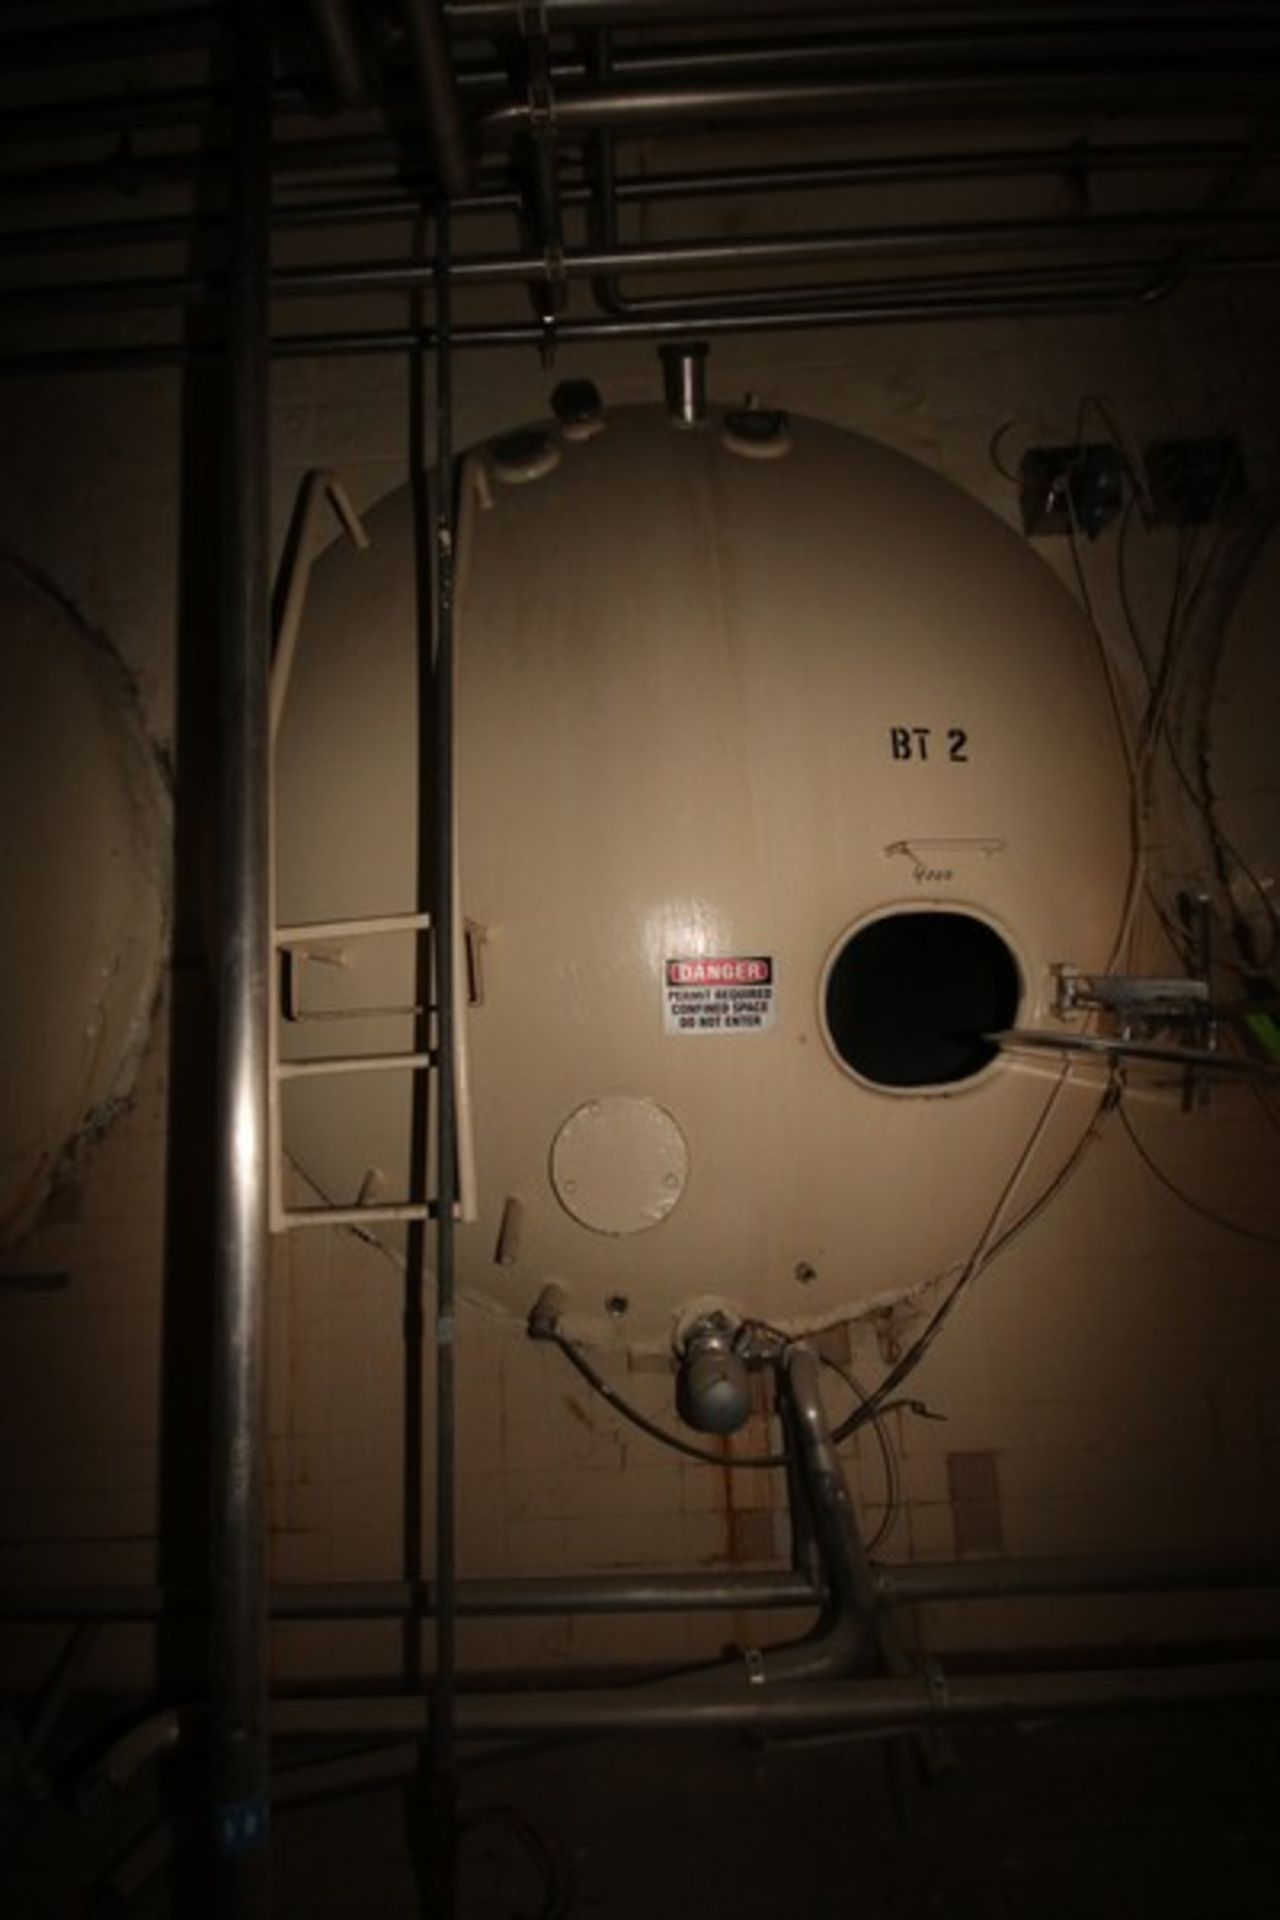 Aprox. 4,000 Gal. S/S Horizontal Tank, with Carbon Steel Sheathing, Dish Heads, Tank Dims.: Aprox. - Image 2 of 4